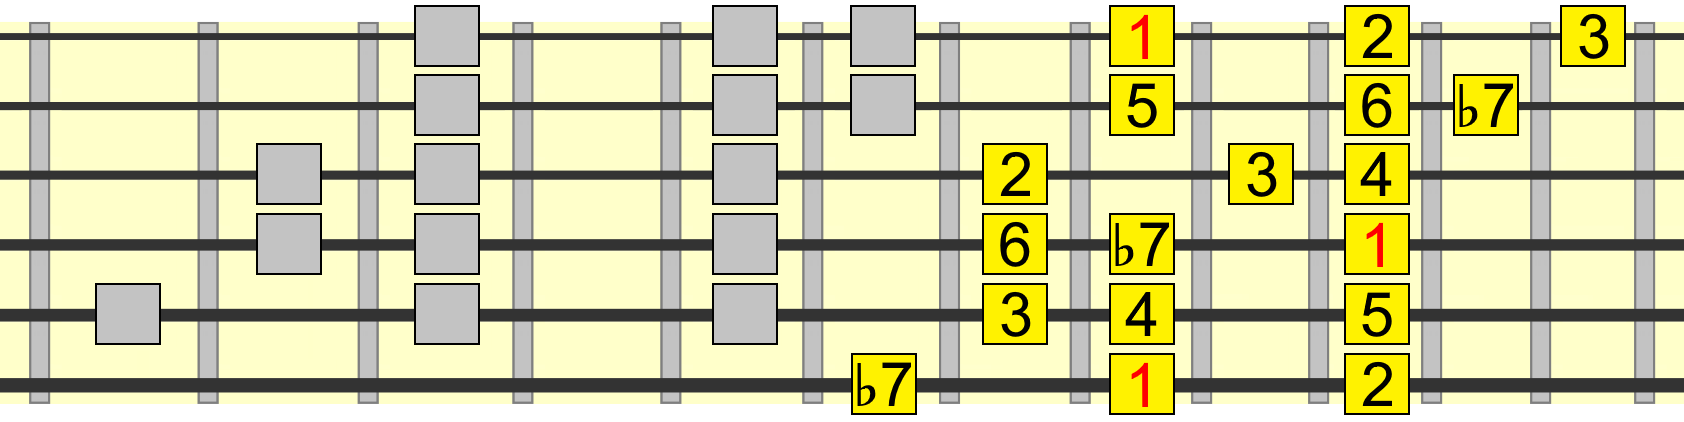 extended 4 chord mixolydian blues pattern